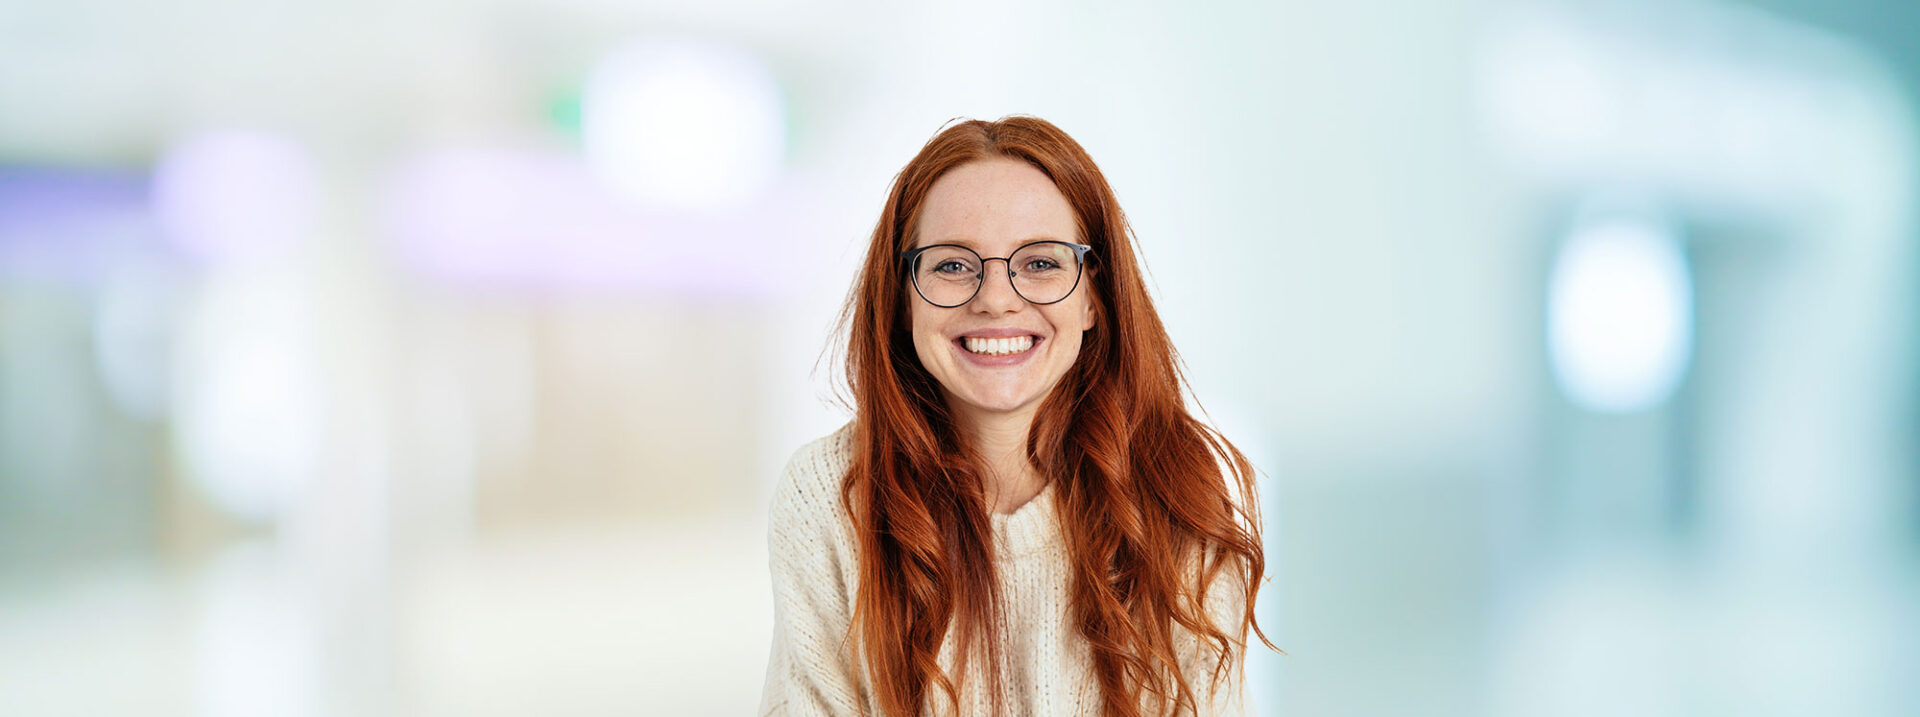 Smiling friendly young woman with long red hair wearing spectacles looking at the camera with a vivacious smile against a white interior wall with copy space